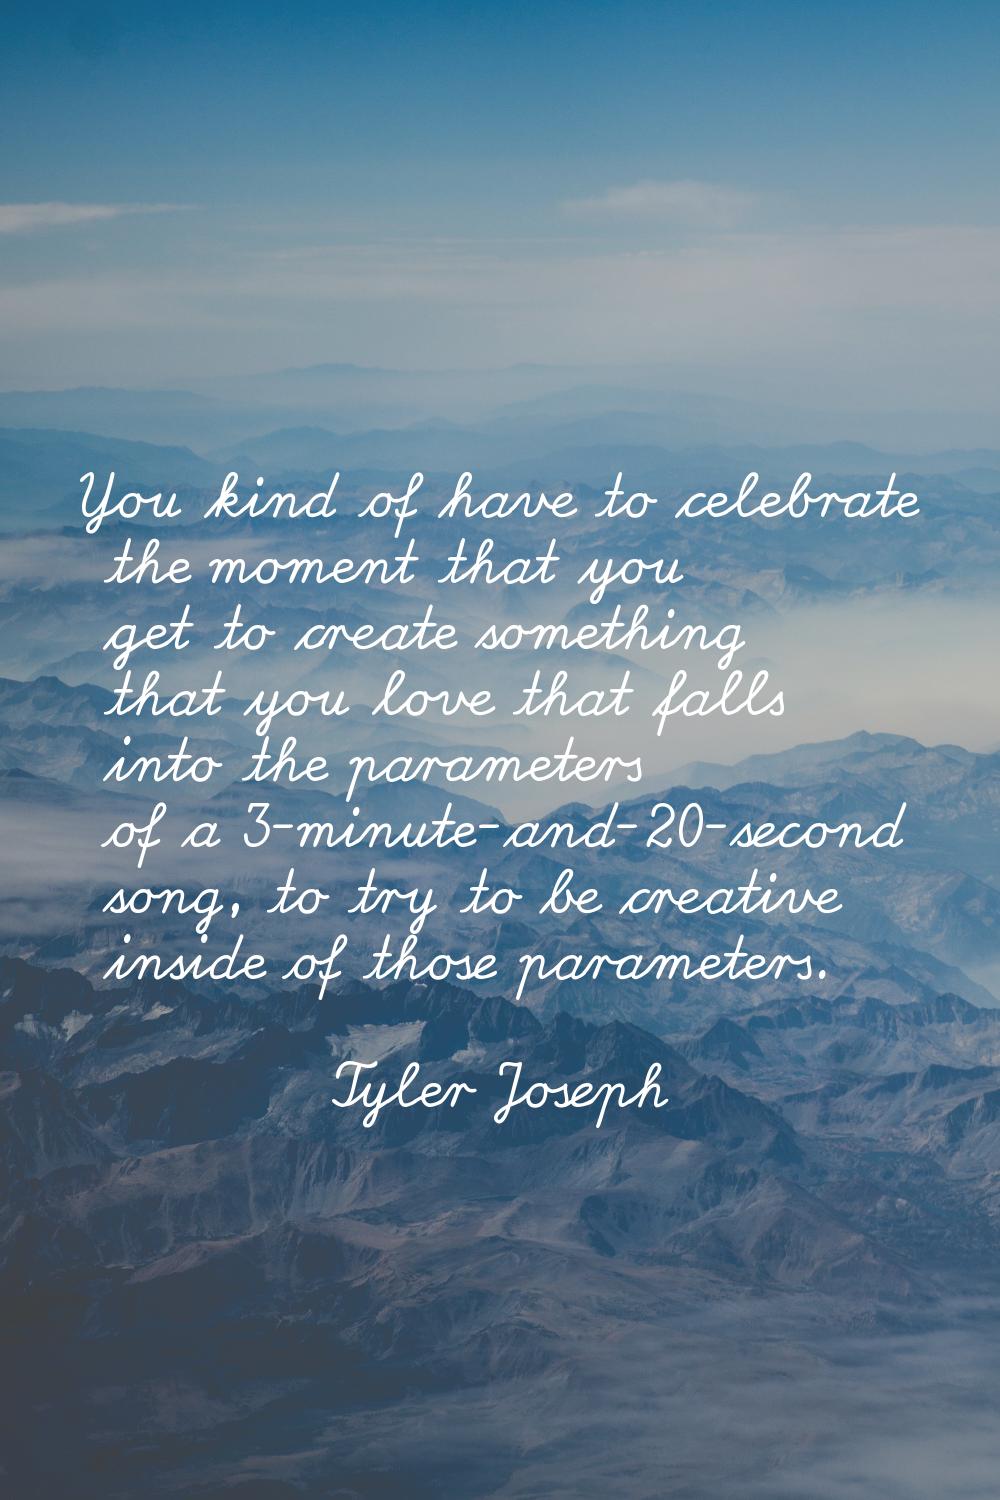 You kind of have to celebrate the moment that you get to create something that you love that falls 